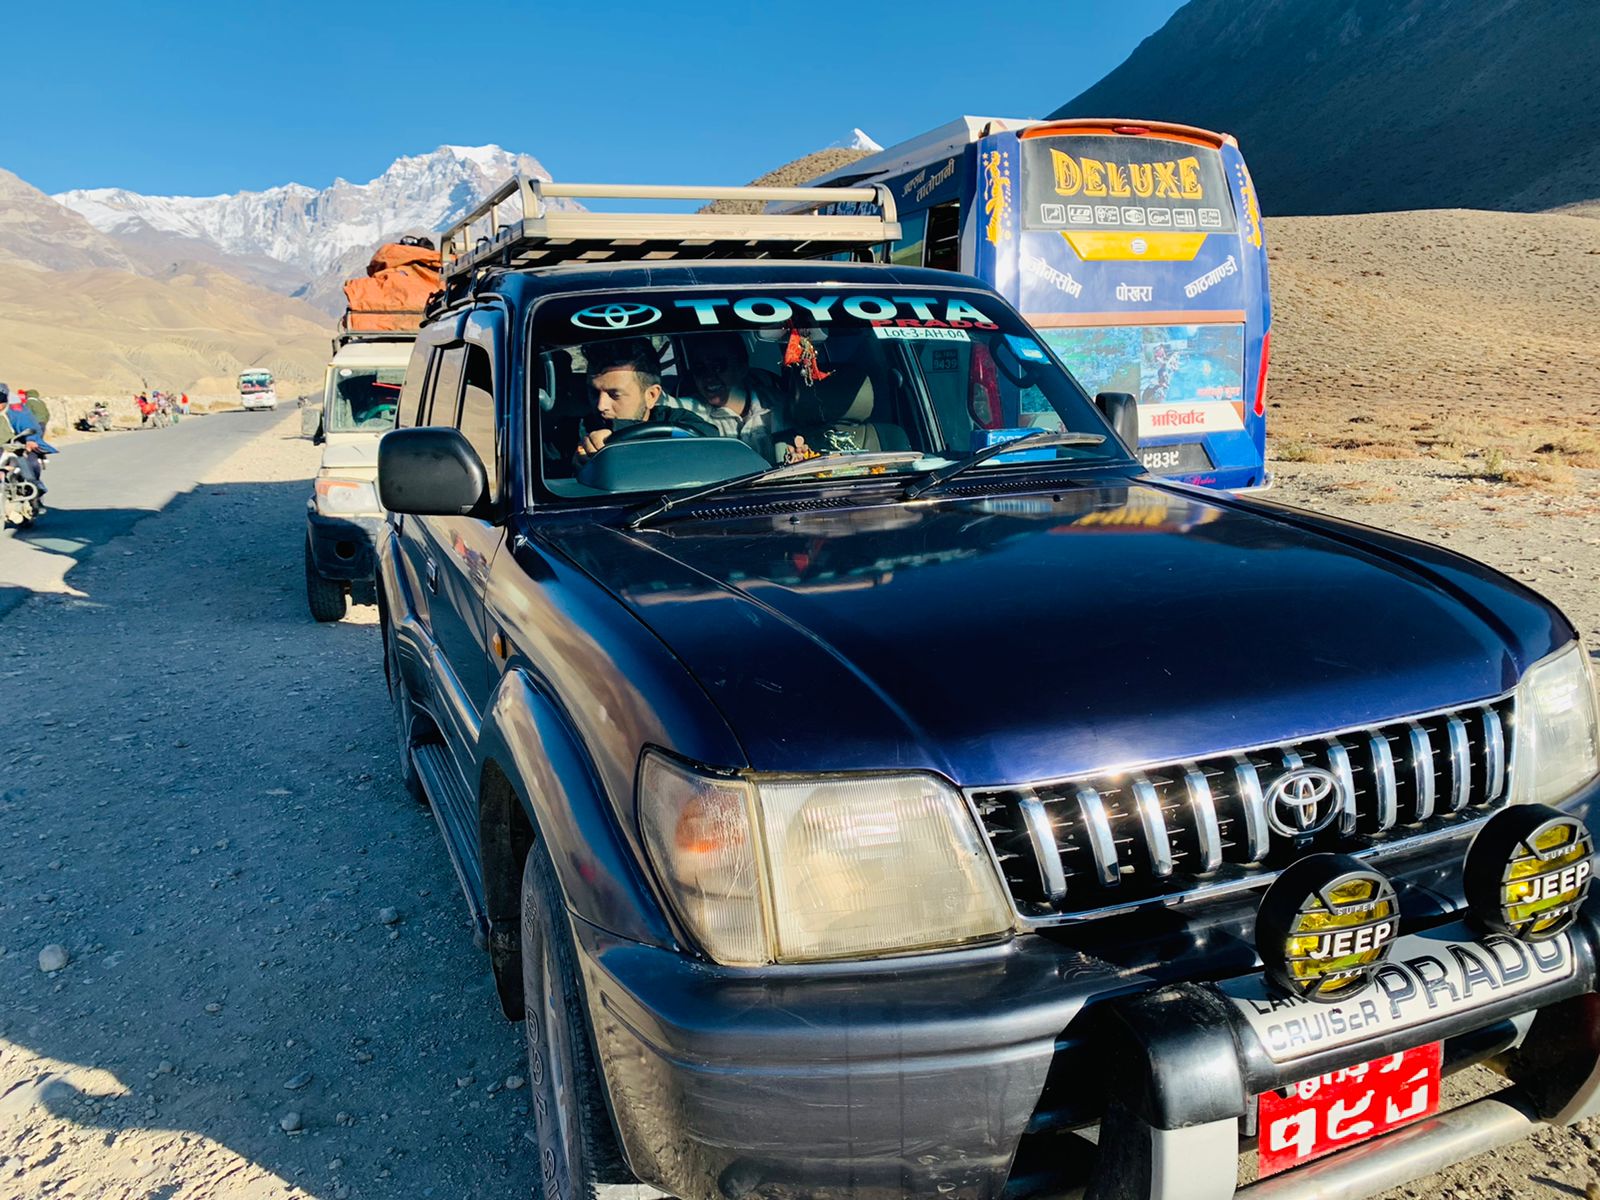 Vehicle Rental Services in Nepal